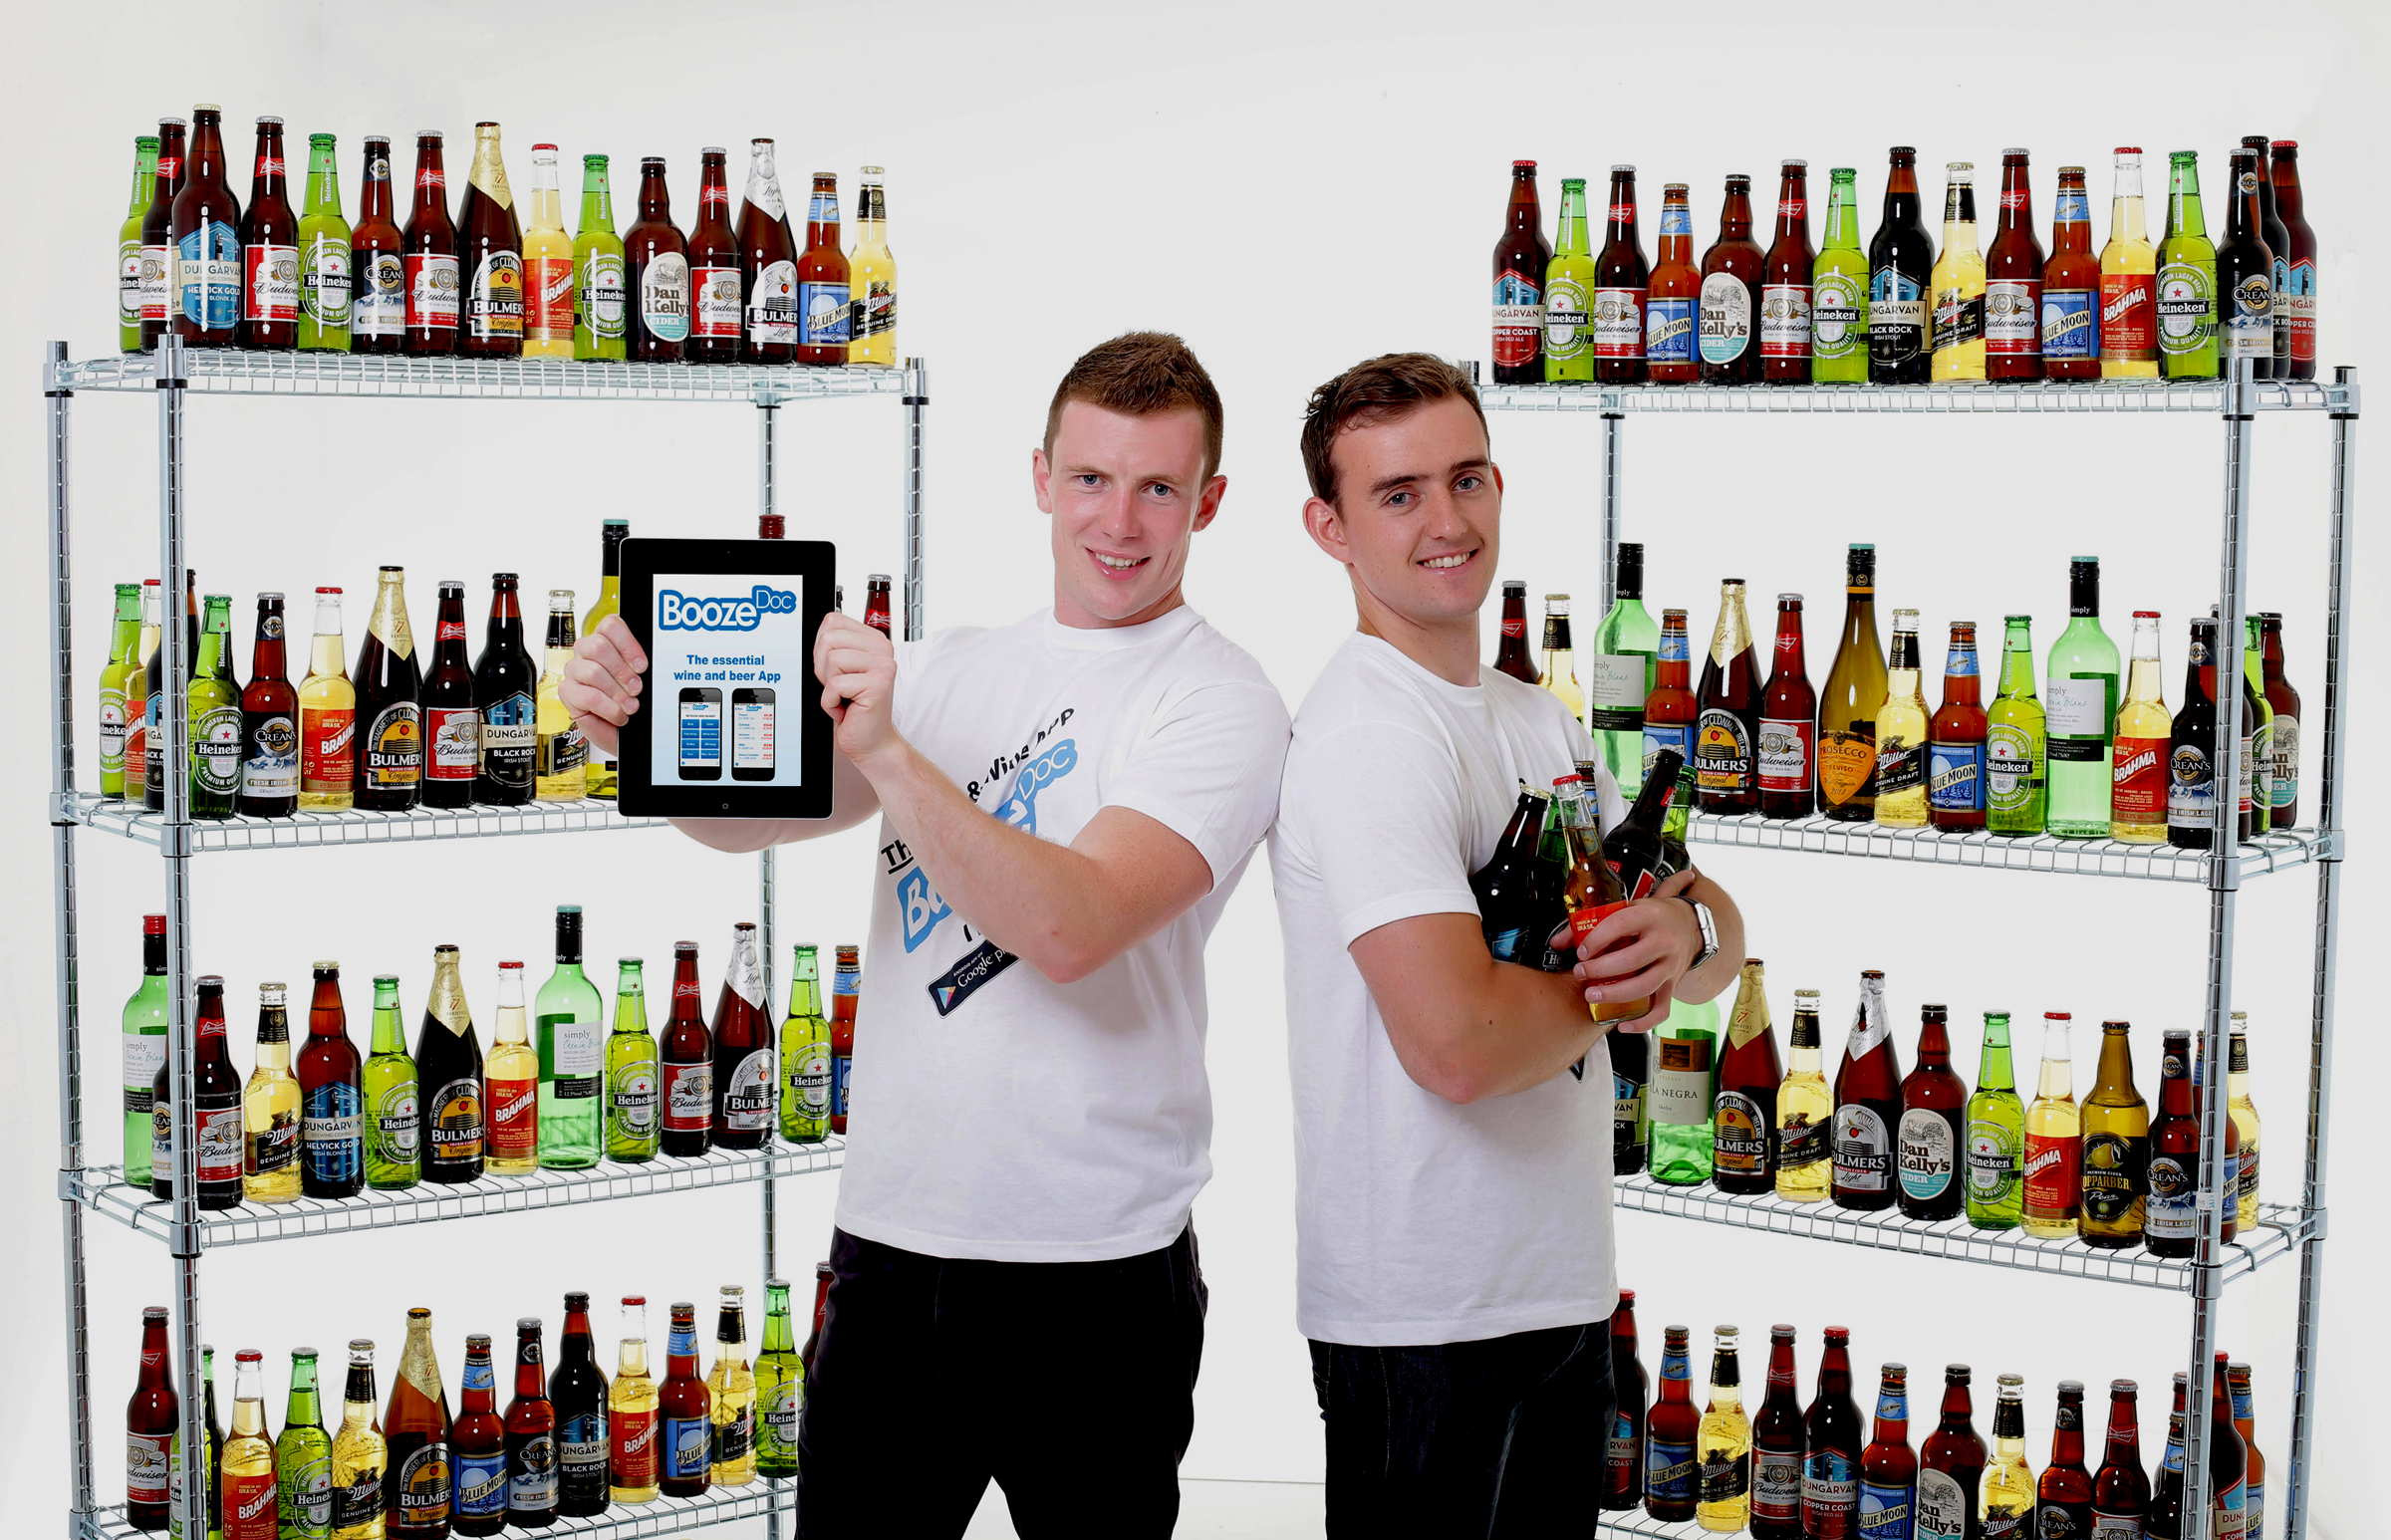 David Keenaghan and Mike Morrissey, founders of MyDealDoc first published BoozeDoc, a new free app that allows the user to see what alcohol special offers are available in their local stores